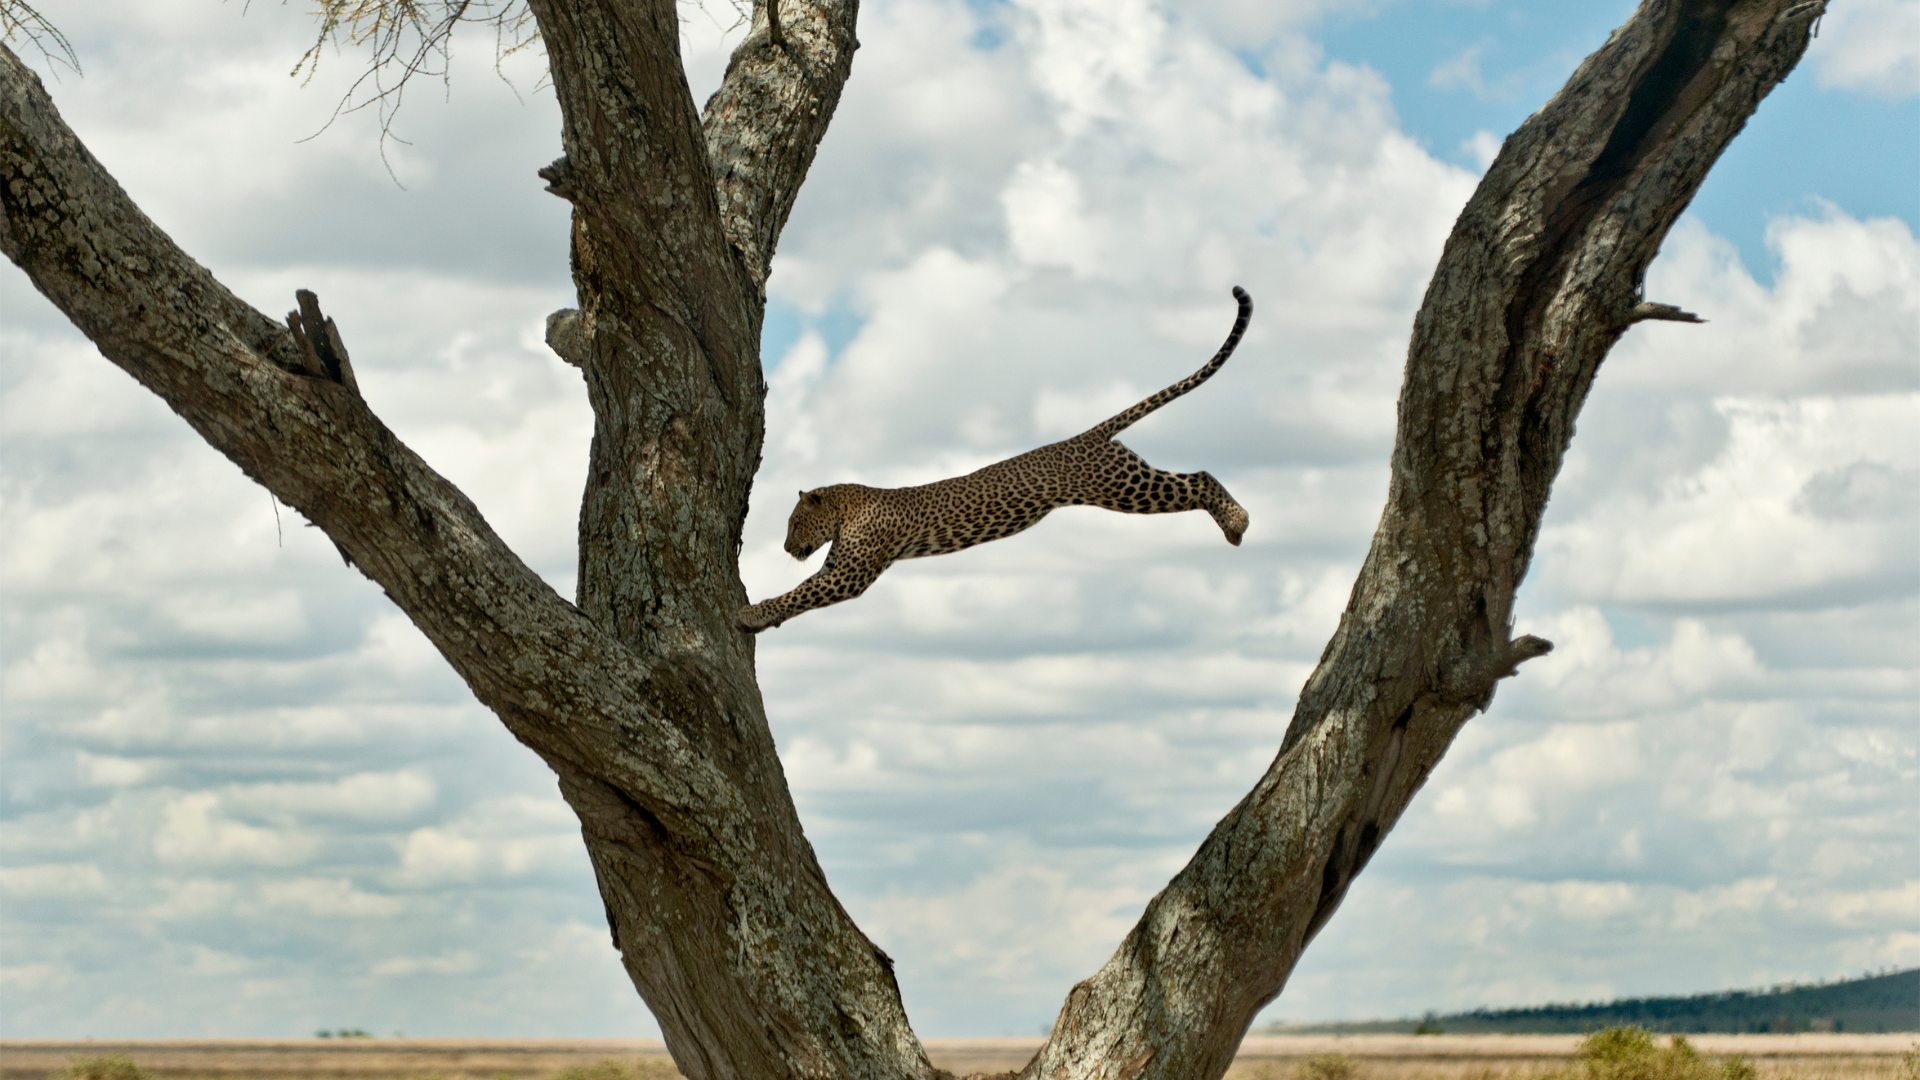 a leopard is jumping from a tree branch